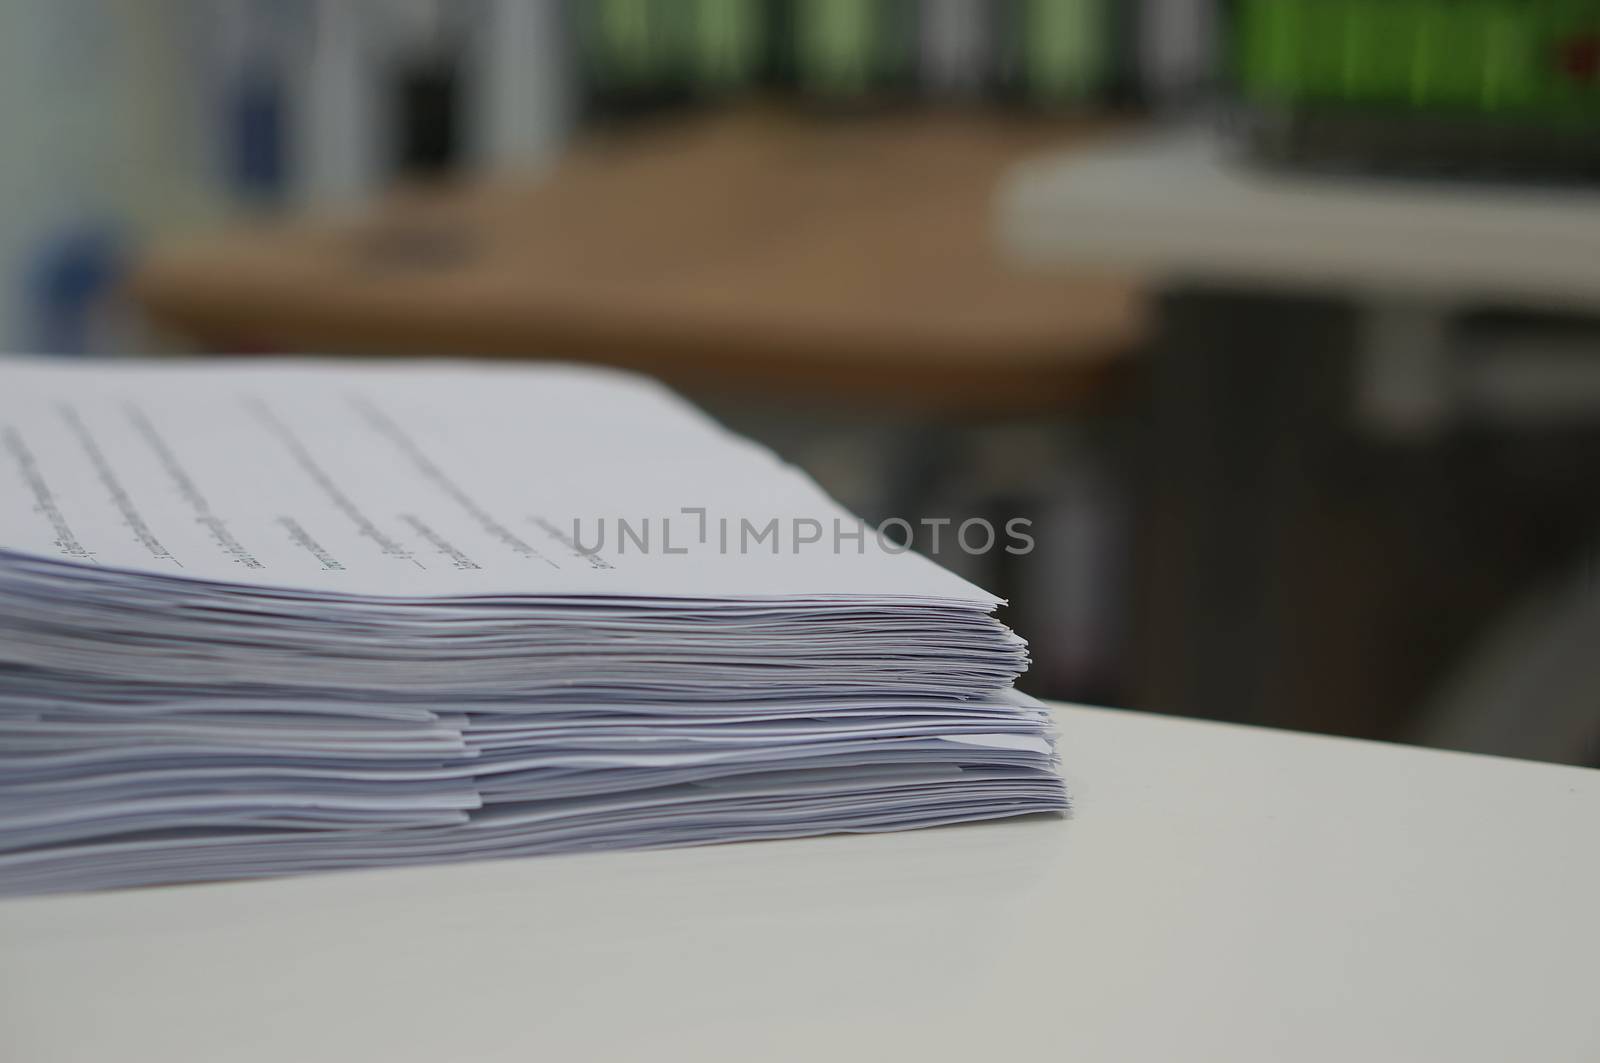 Stack of data work sheet was placed on desk in office.